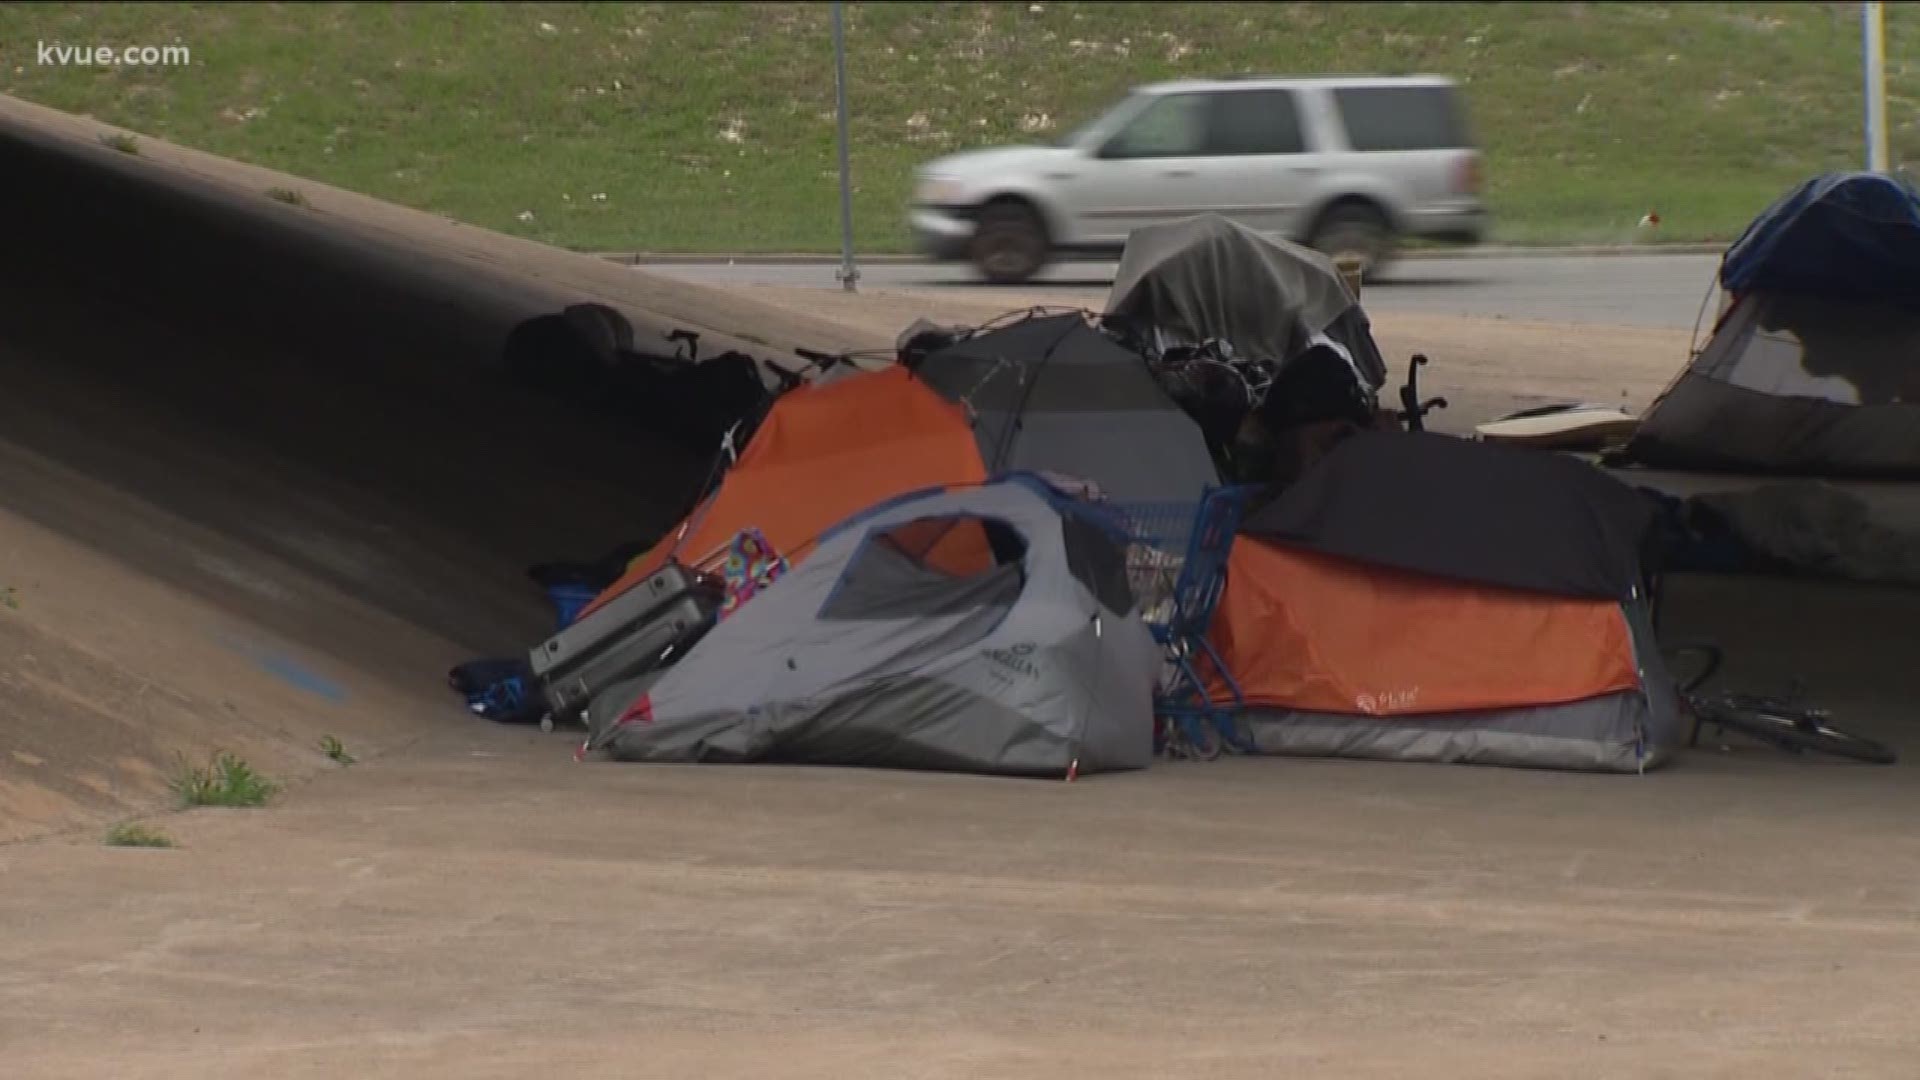 The nonprofit group Save Austin Now is pushing to reinstate the city's homeless camping ban.